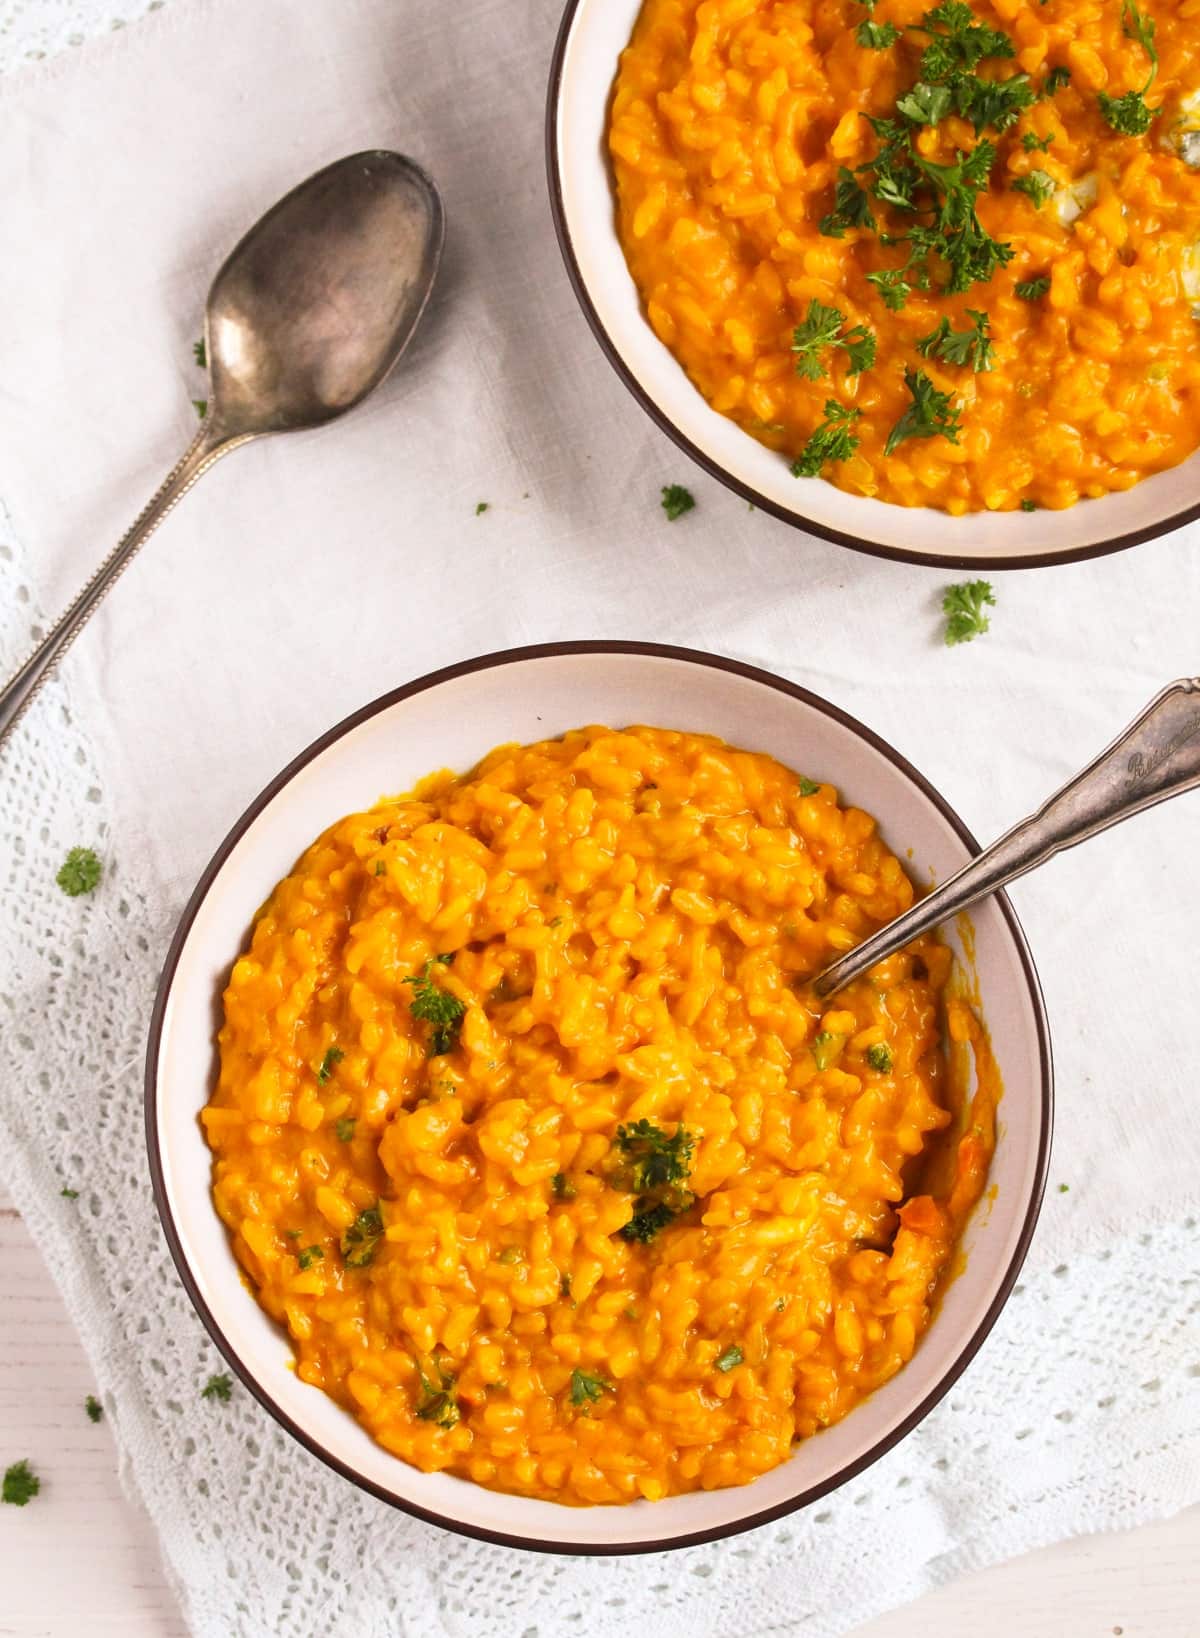 two bowls of gorgonzola risotto with pumpkin, one sprinkled with parsley.